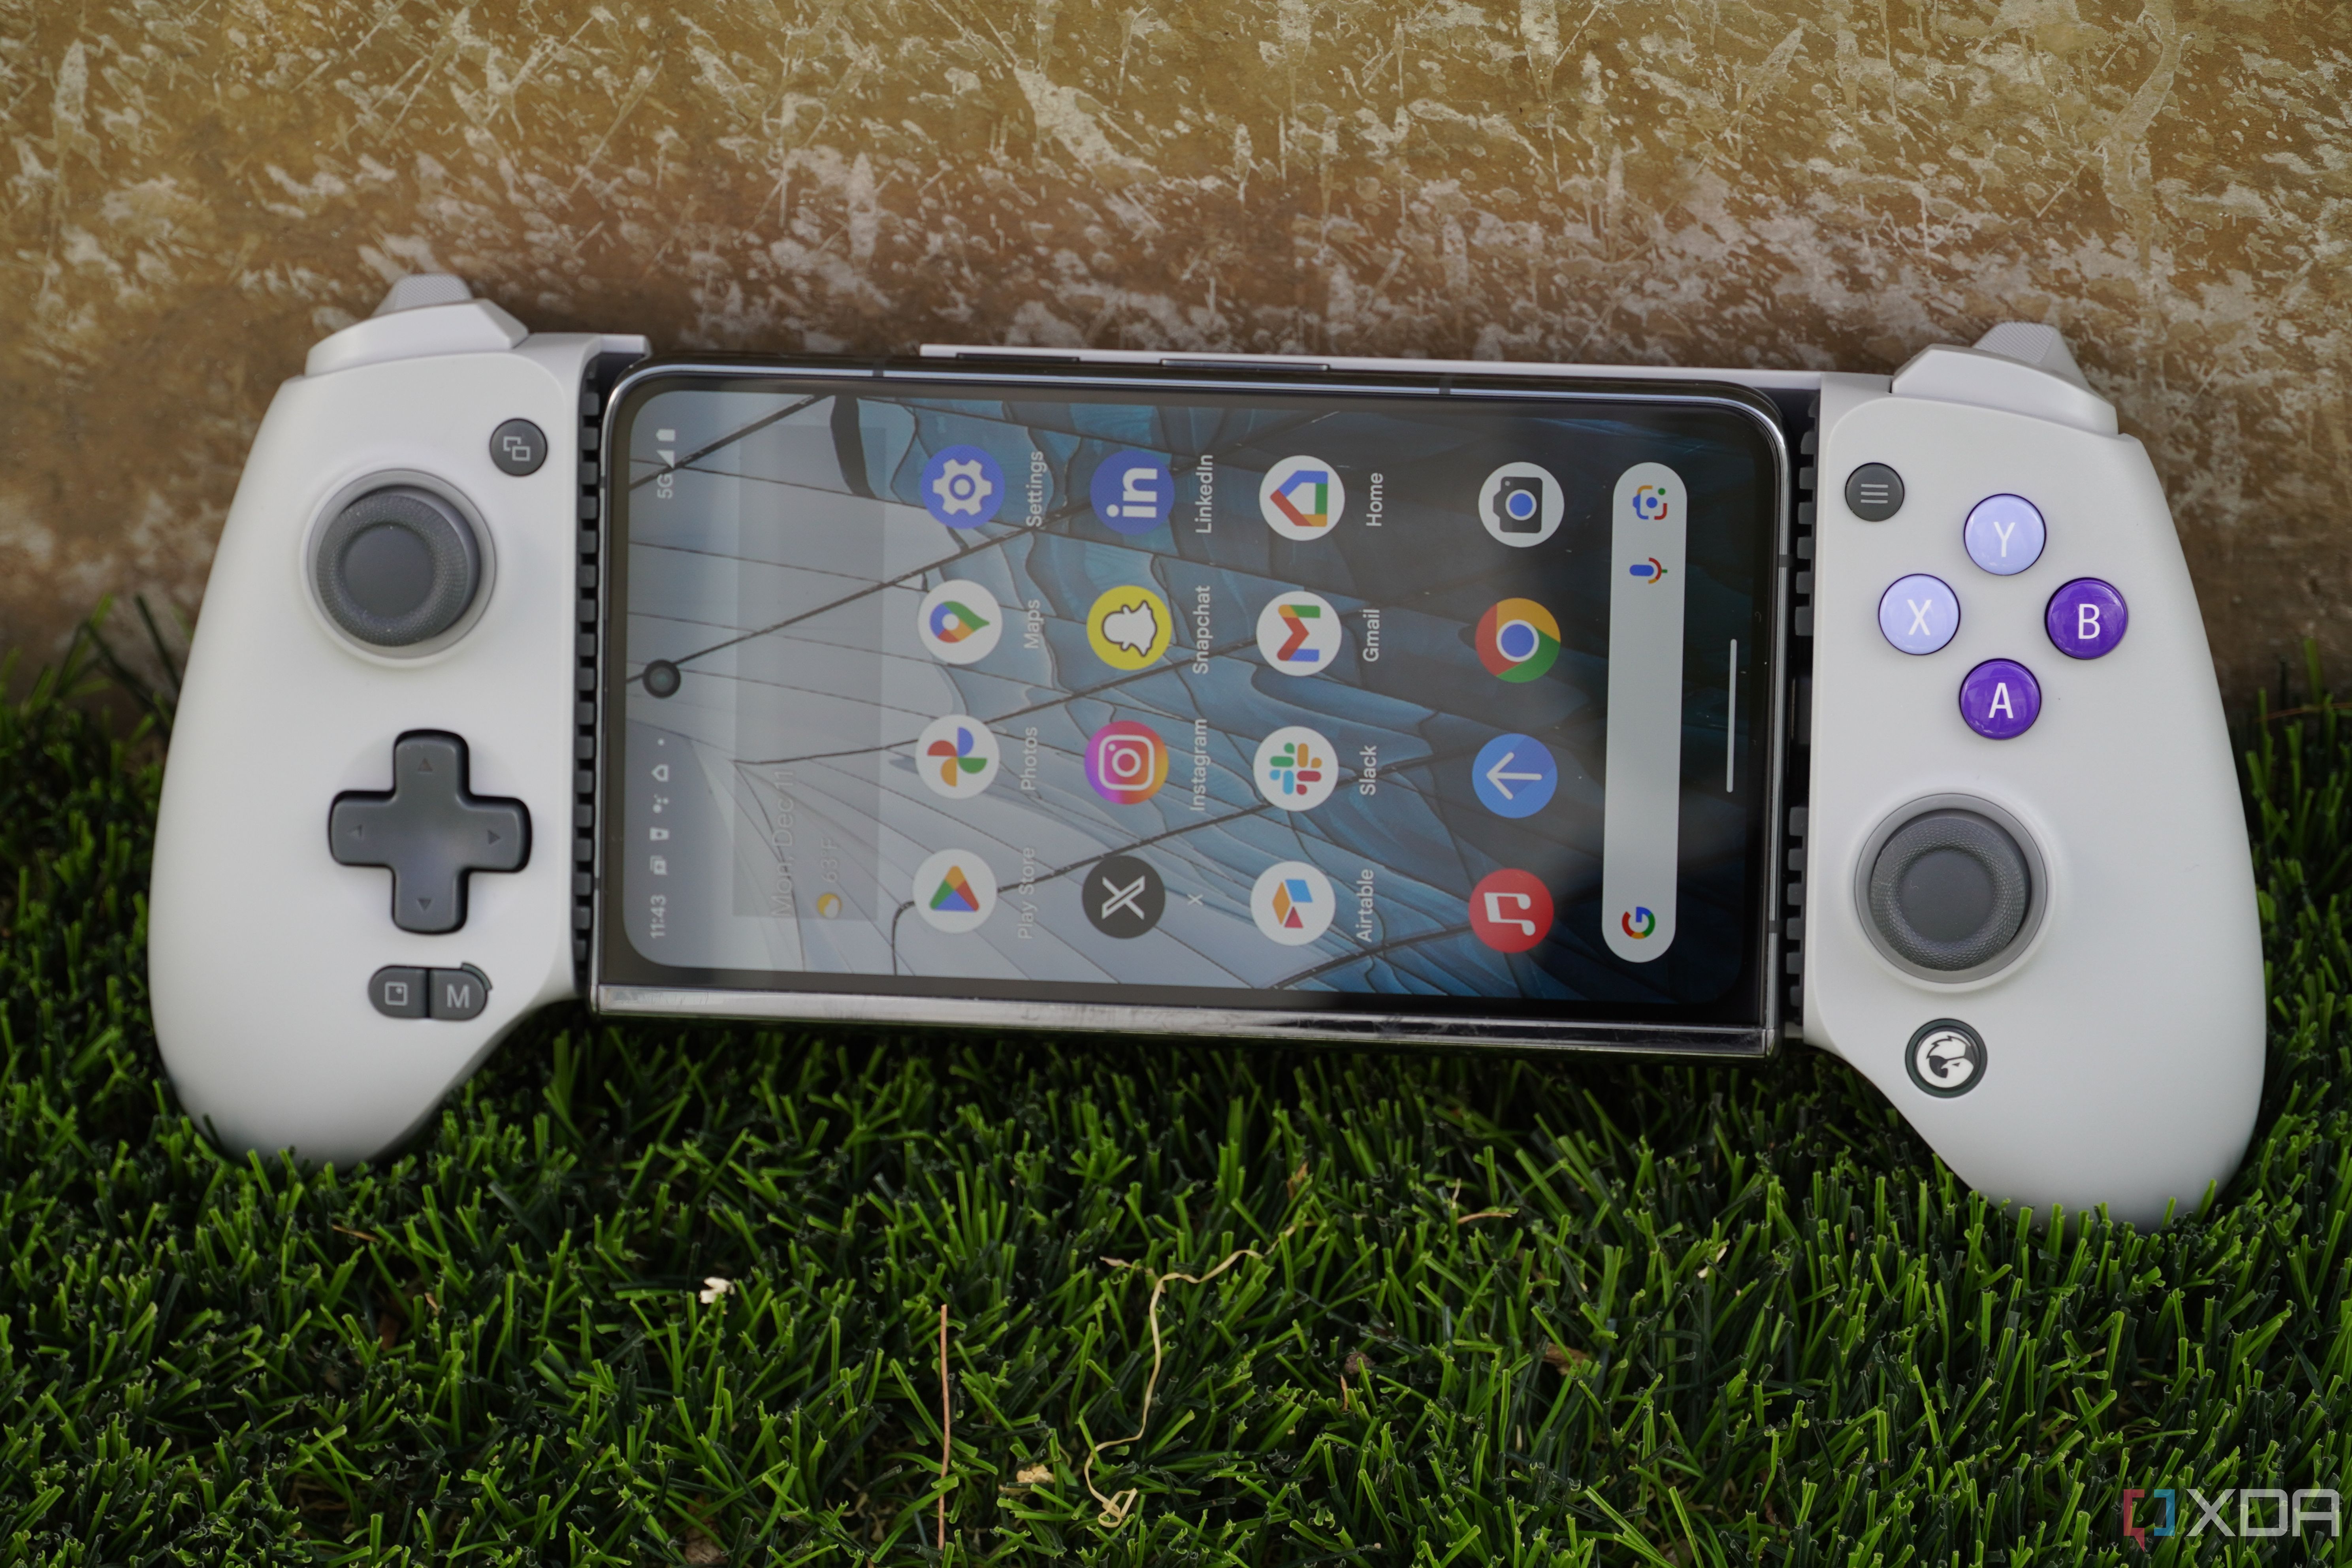 GameSir G8 Galileo review: Your phone is finally a proper portable